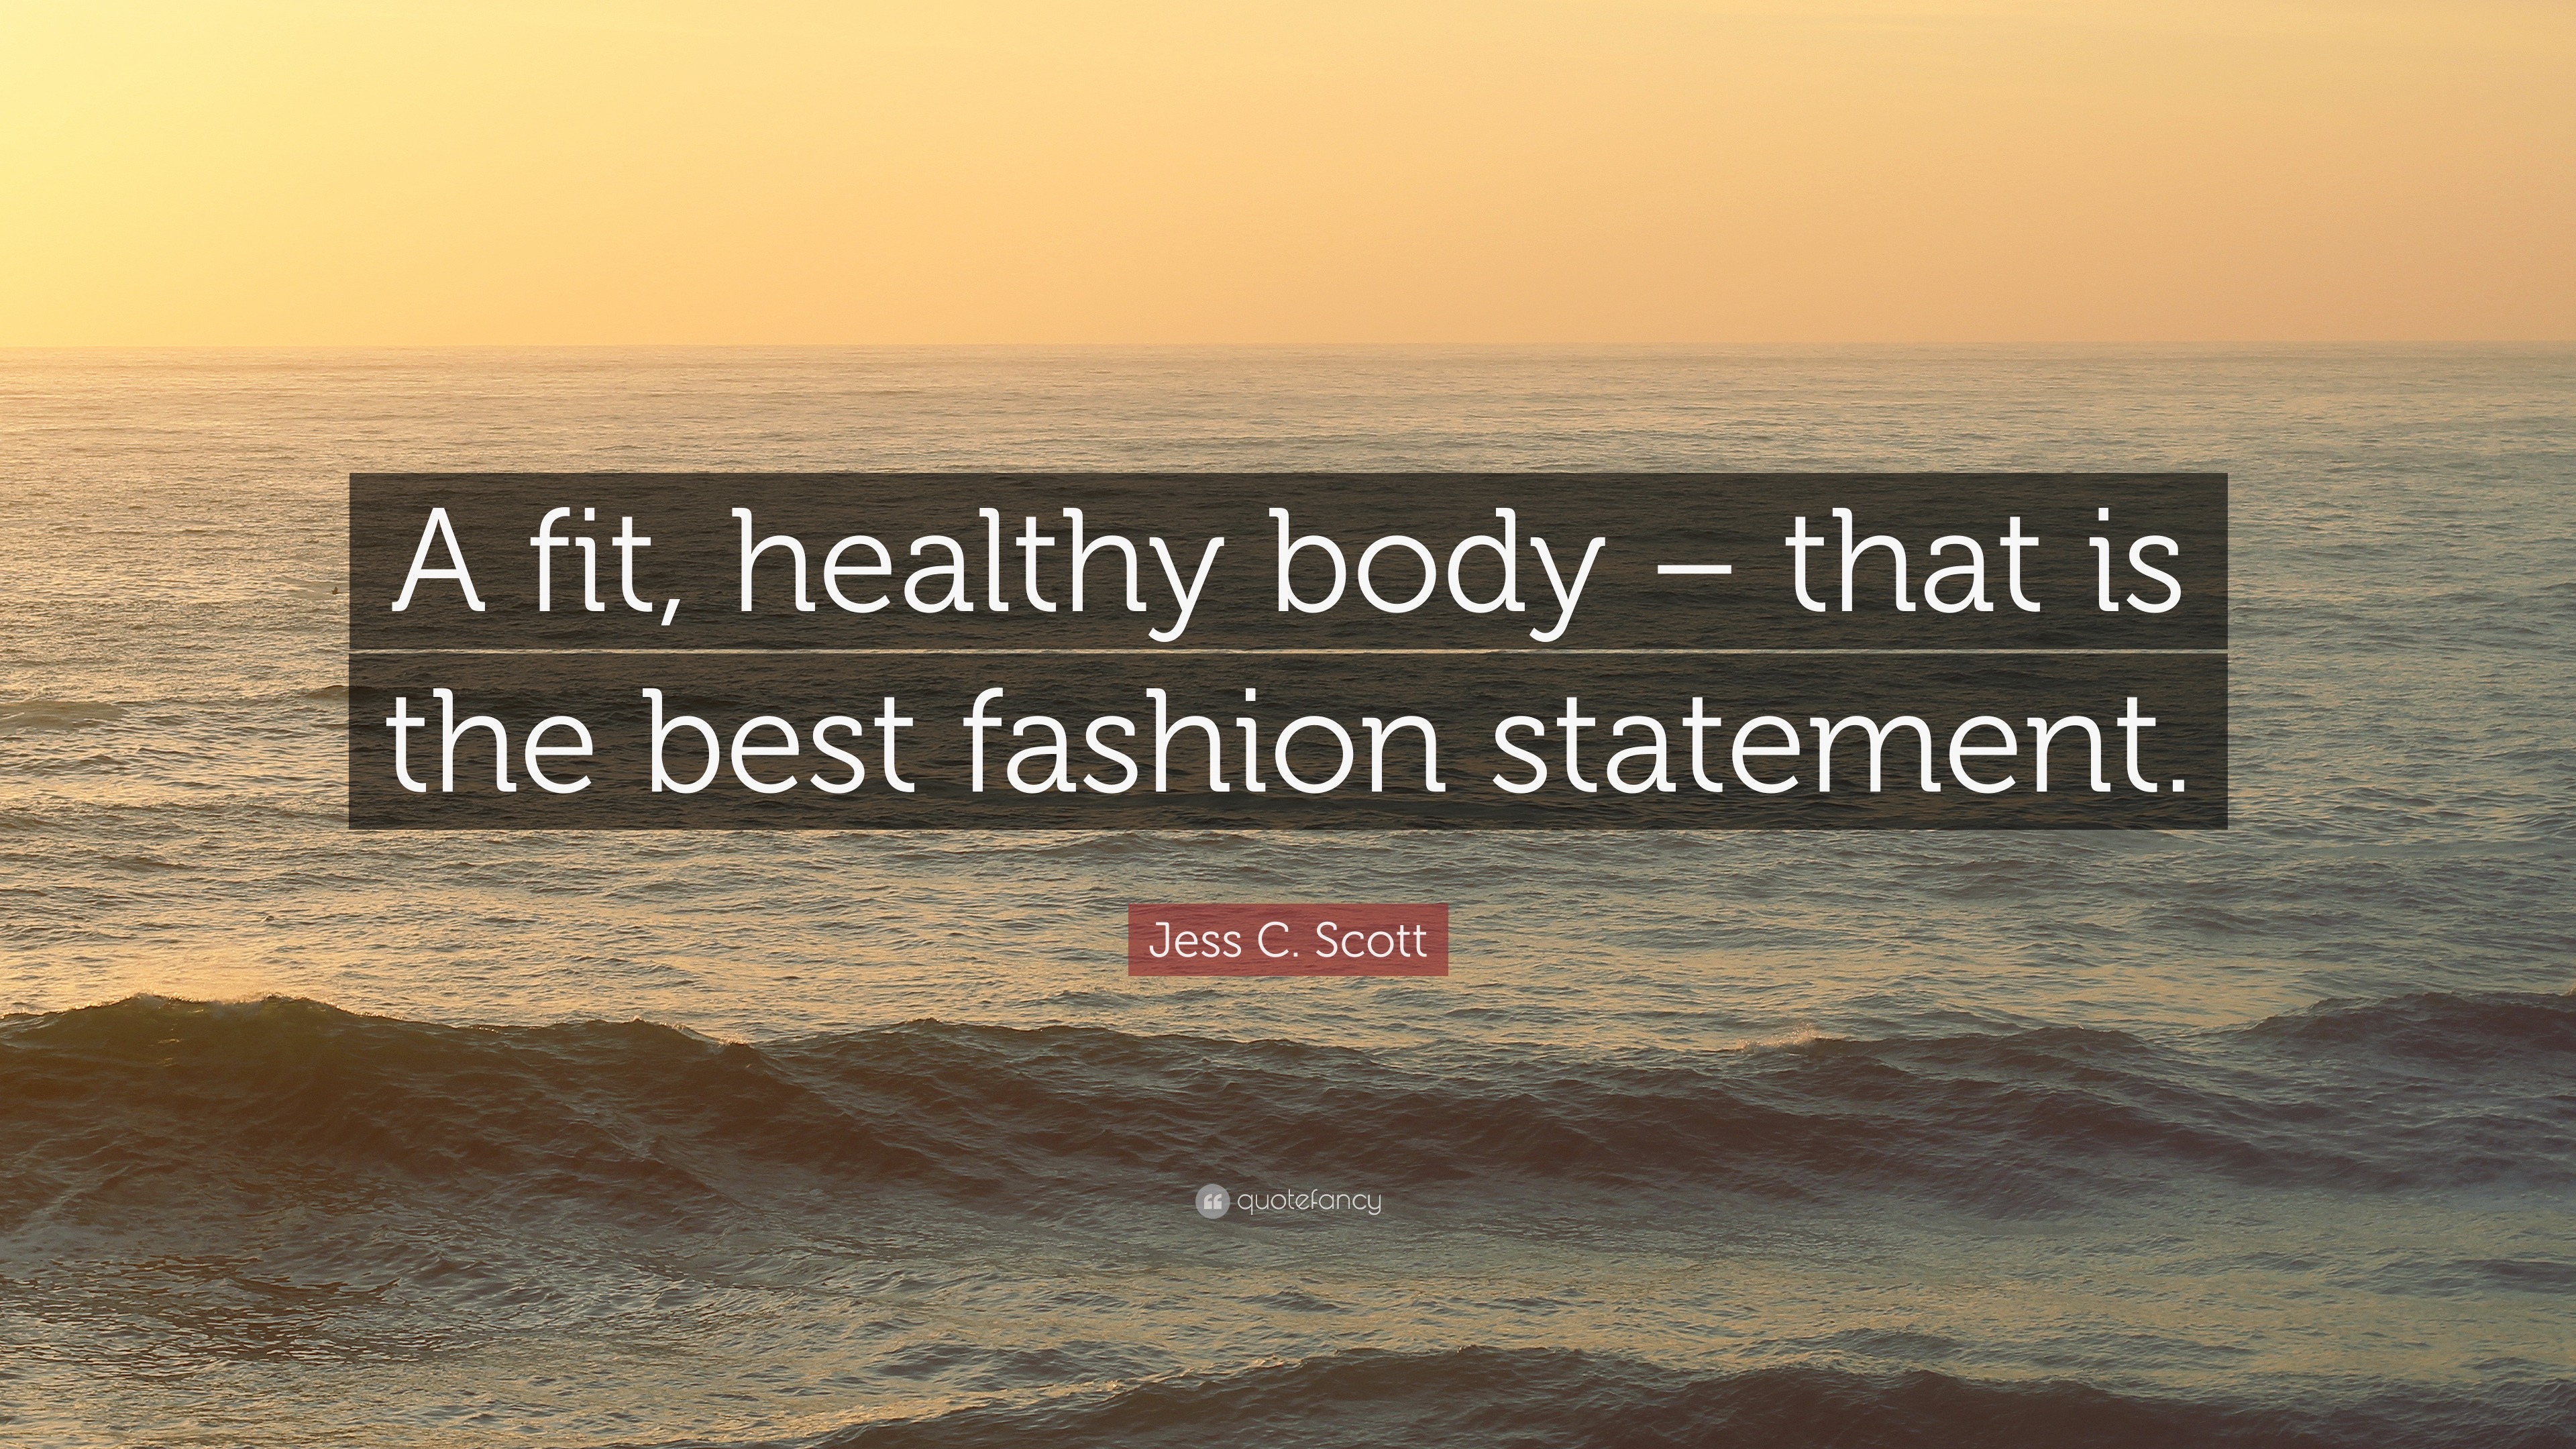 Jess C. Scott Quote: “A fit, healthy body – that is the best fashion